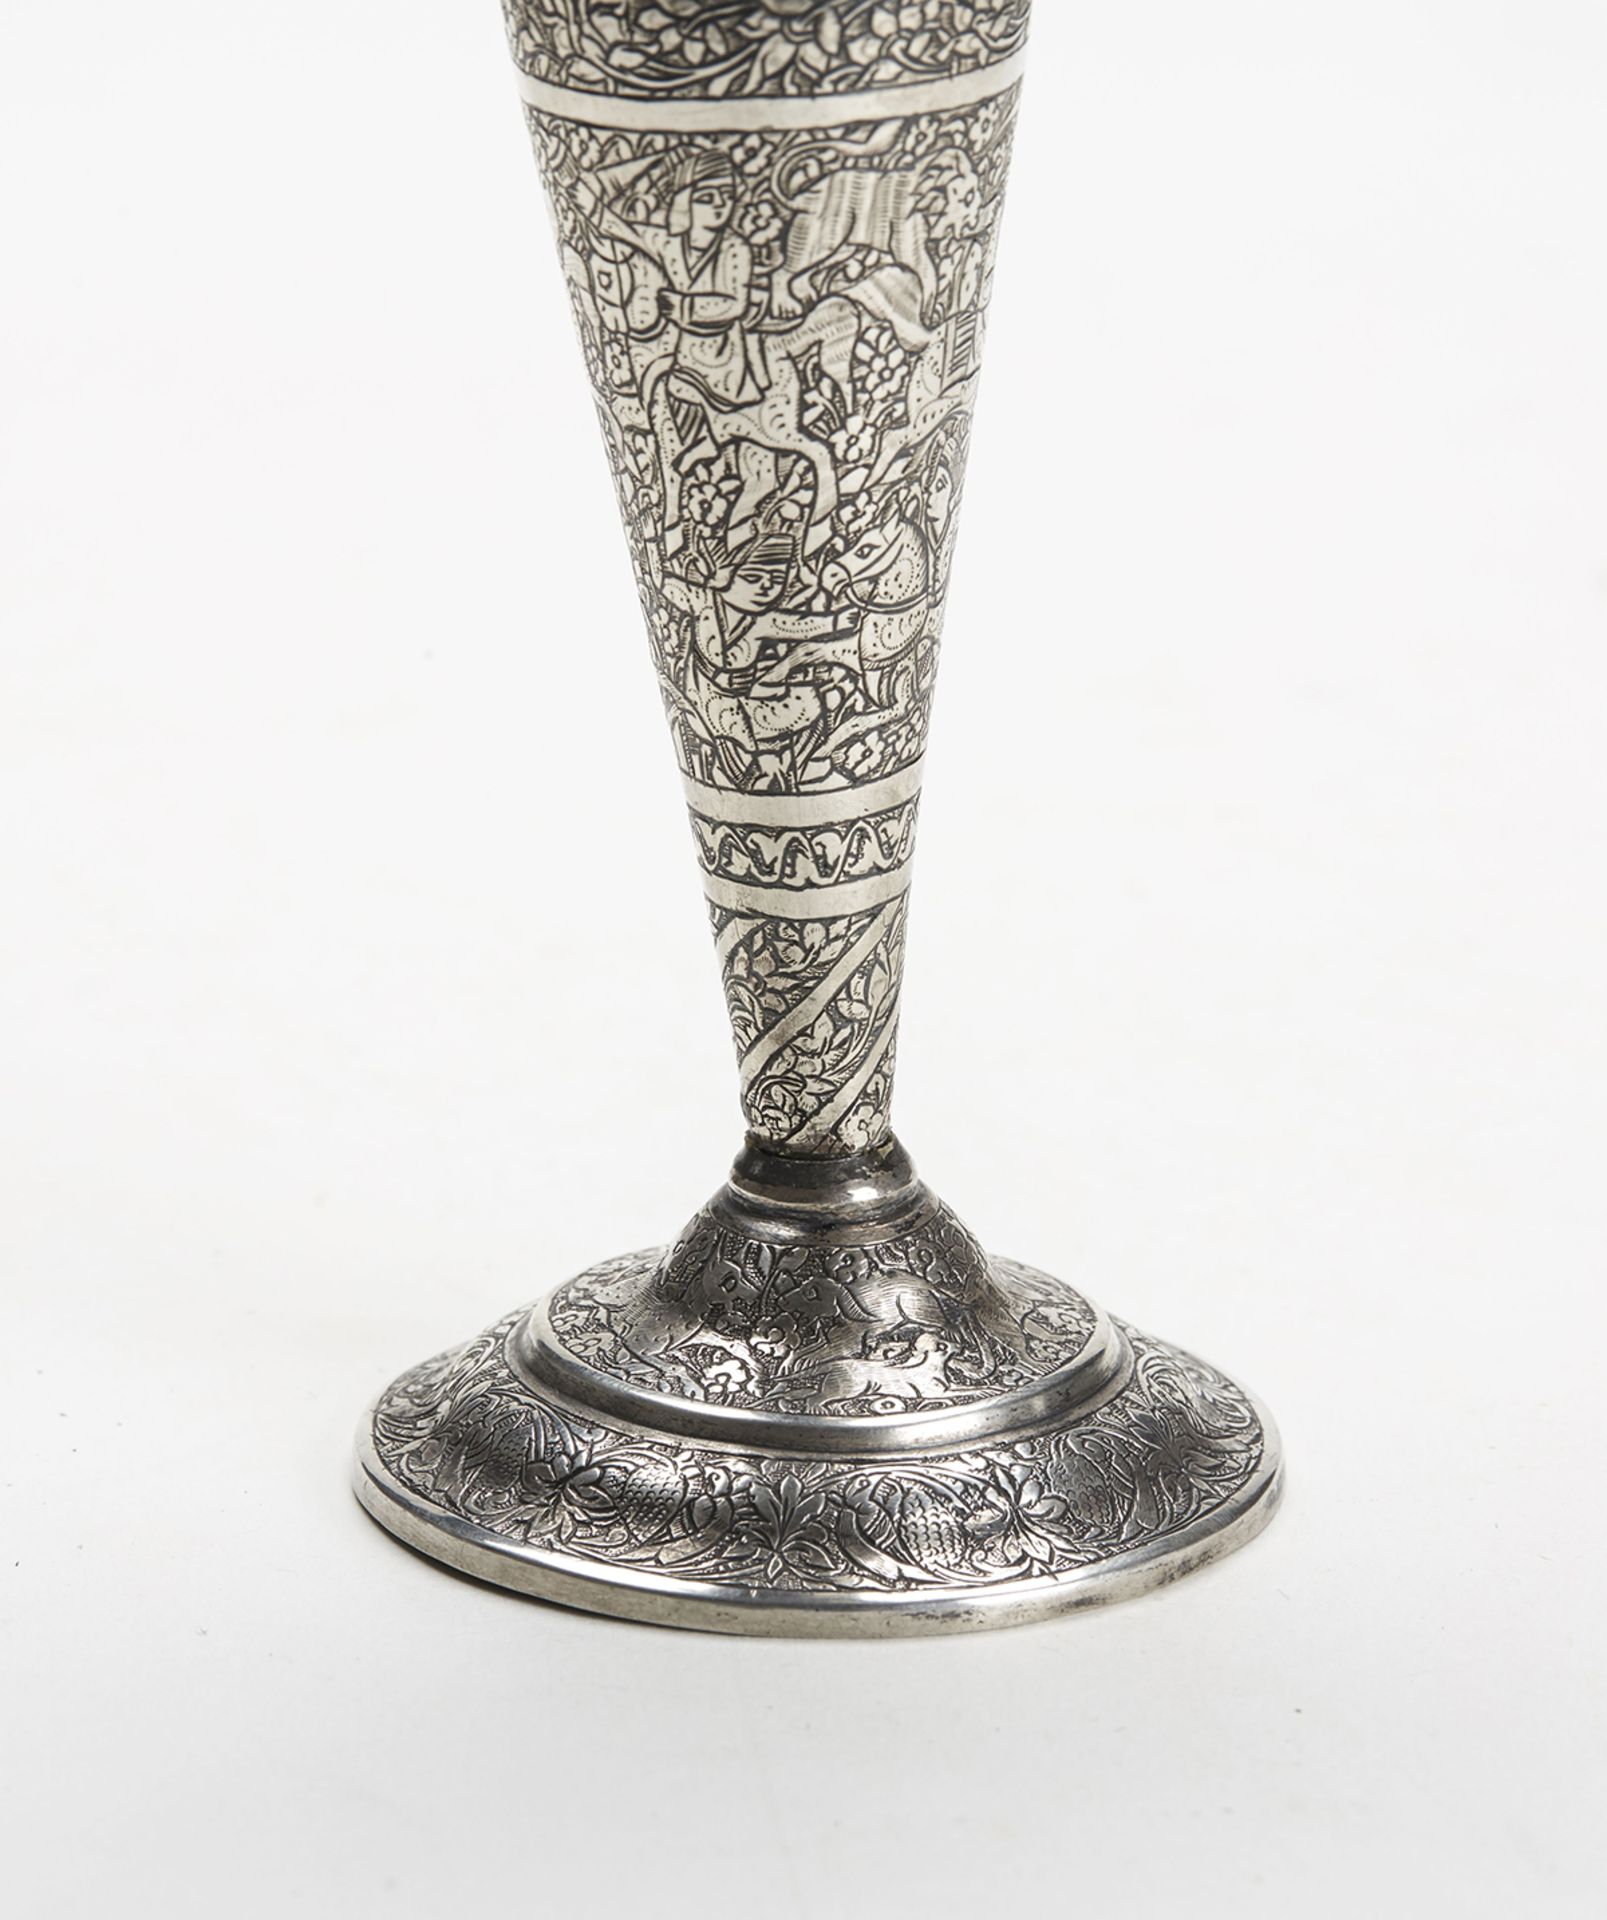 Antique Indian/Asian Silver Figural Vase 19Th C. - Image 2 of 9